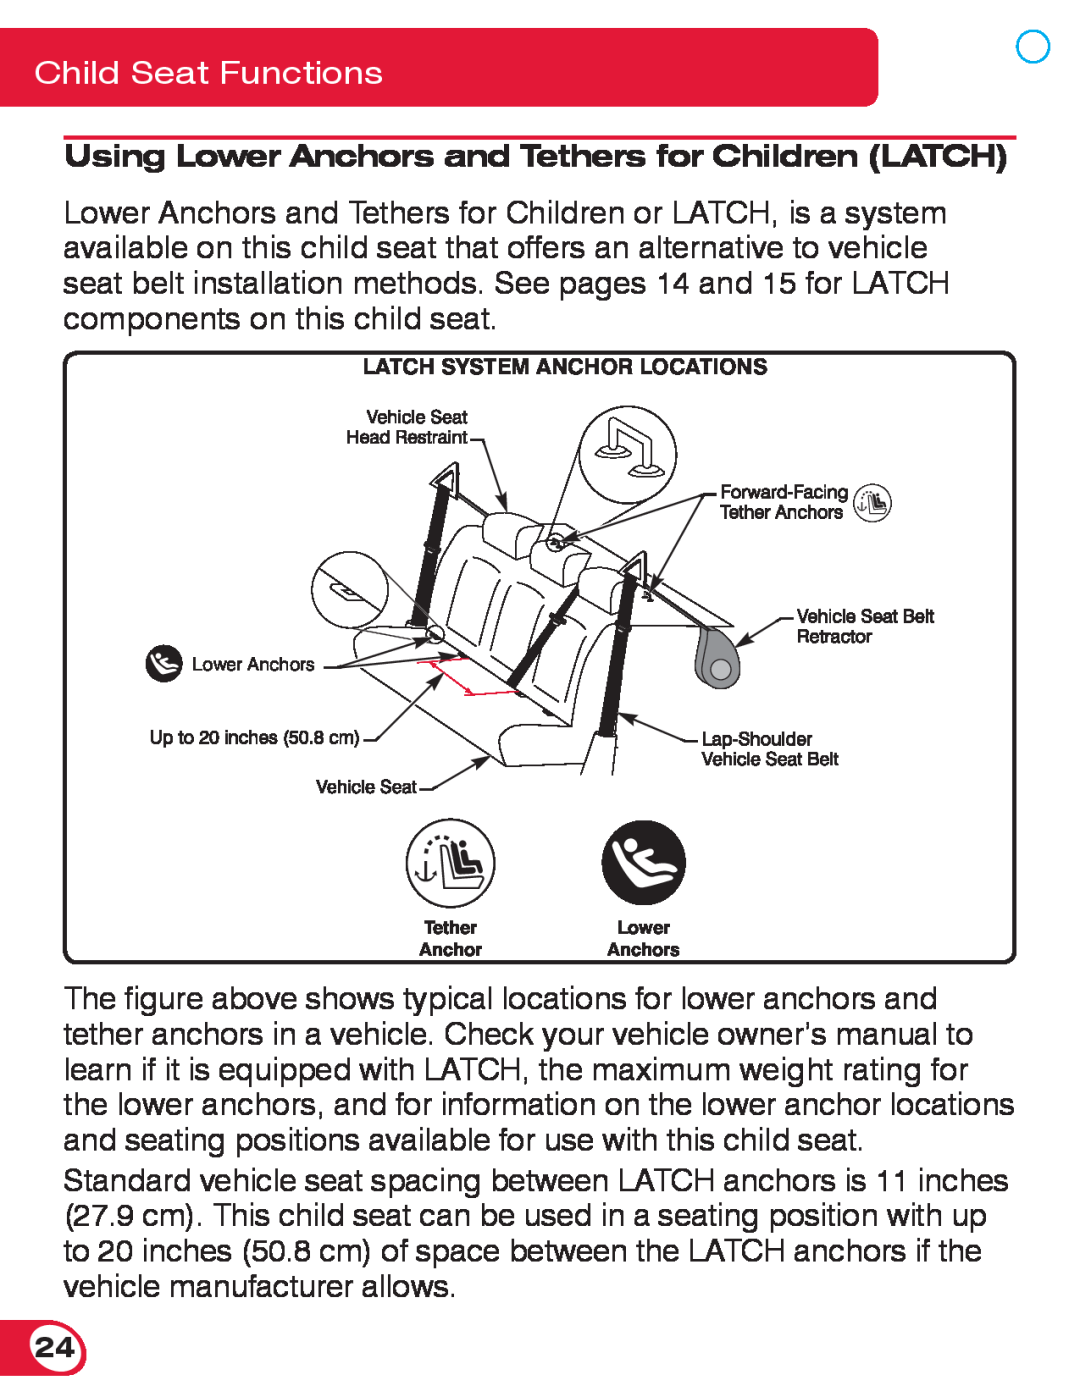 Britax 70 CS manual Using Lower Anchors and Tethers for Children LATCH, Child Seat Functions, Latch System Anchor Locations 